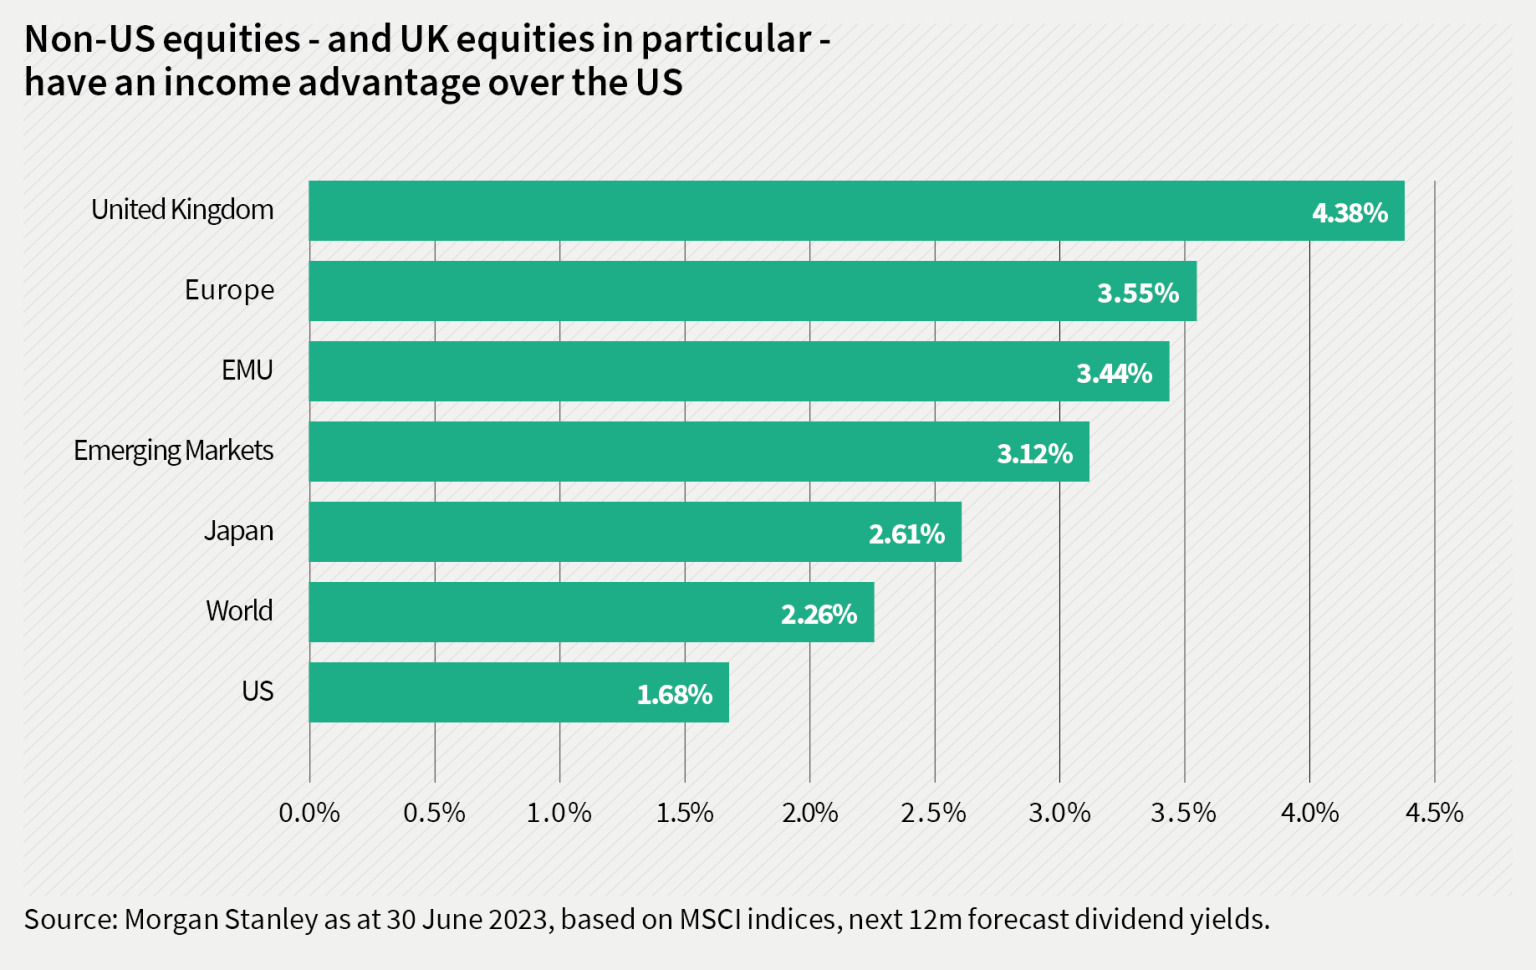 Non-US equities - and UK equities in particular - have an income advantage over the US